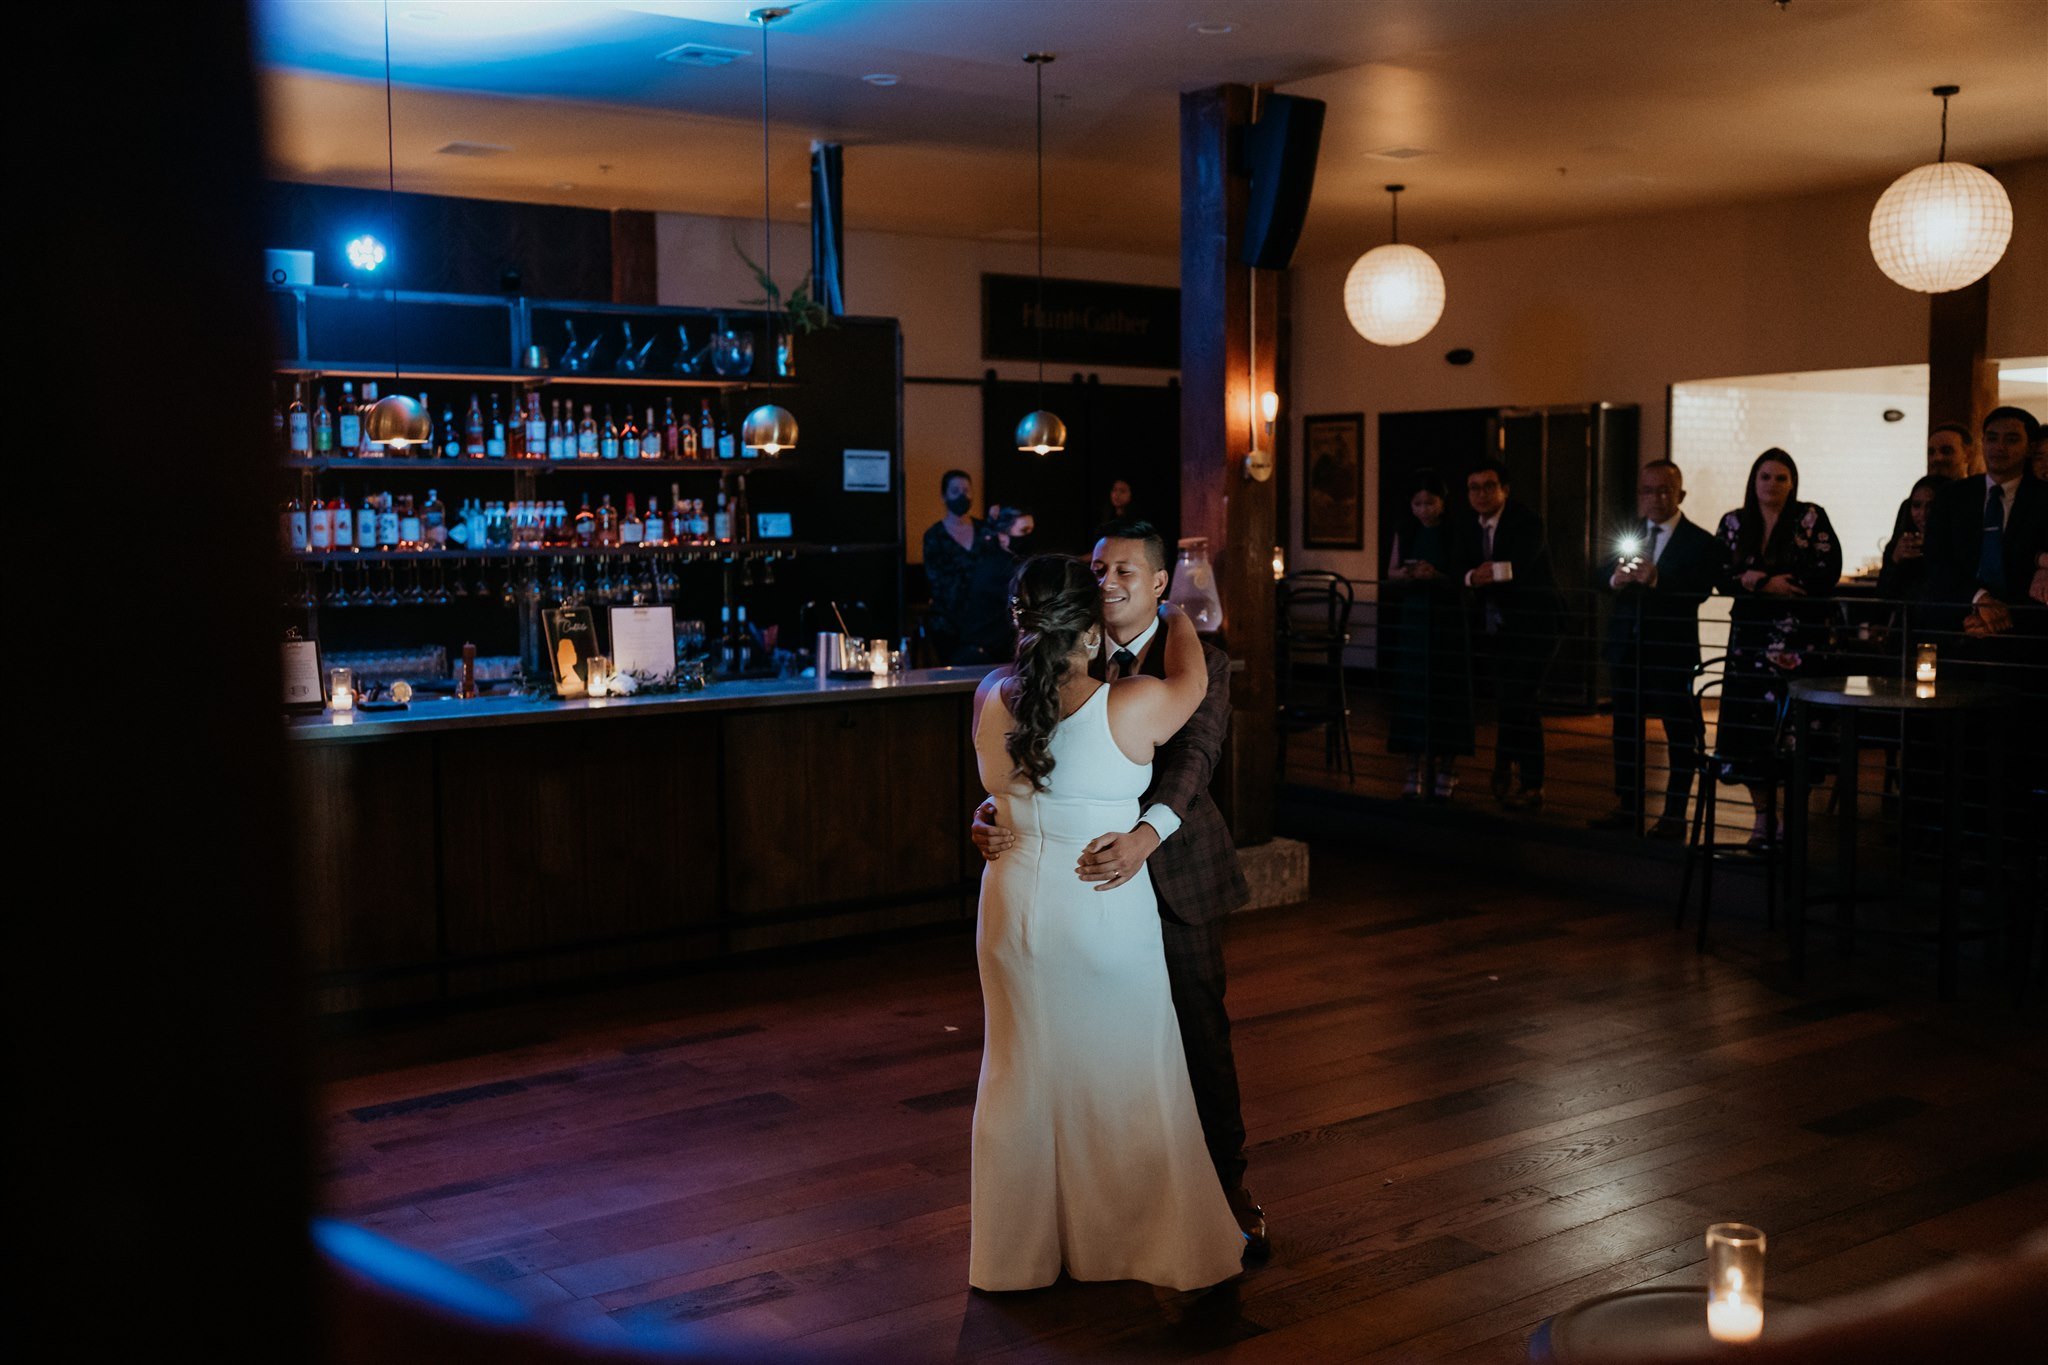 Bride and groom first dance at wedding reception at Hunt and Gather